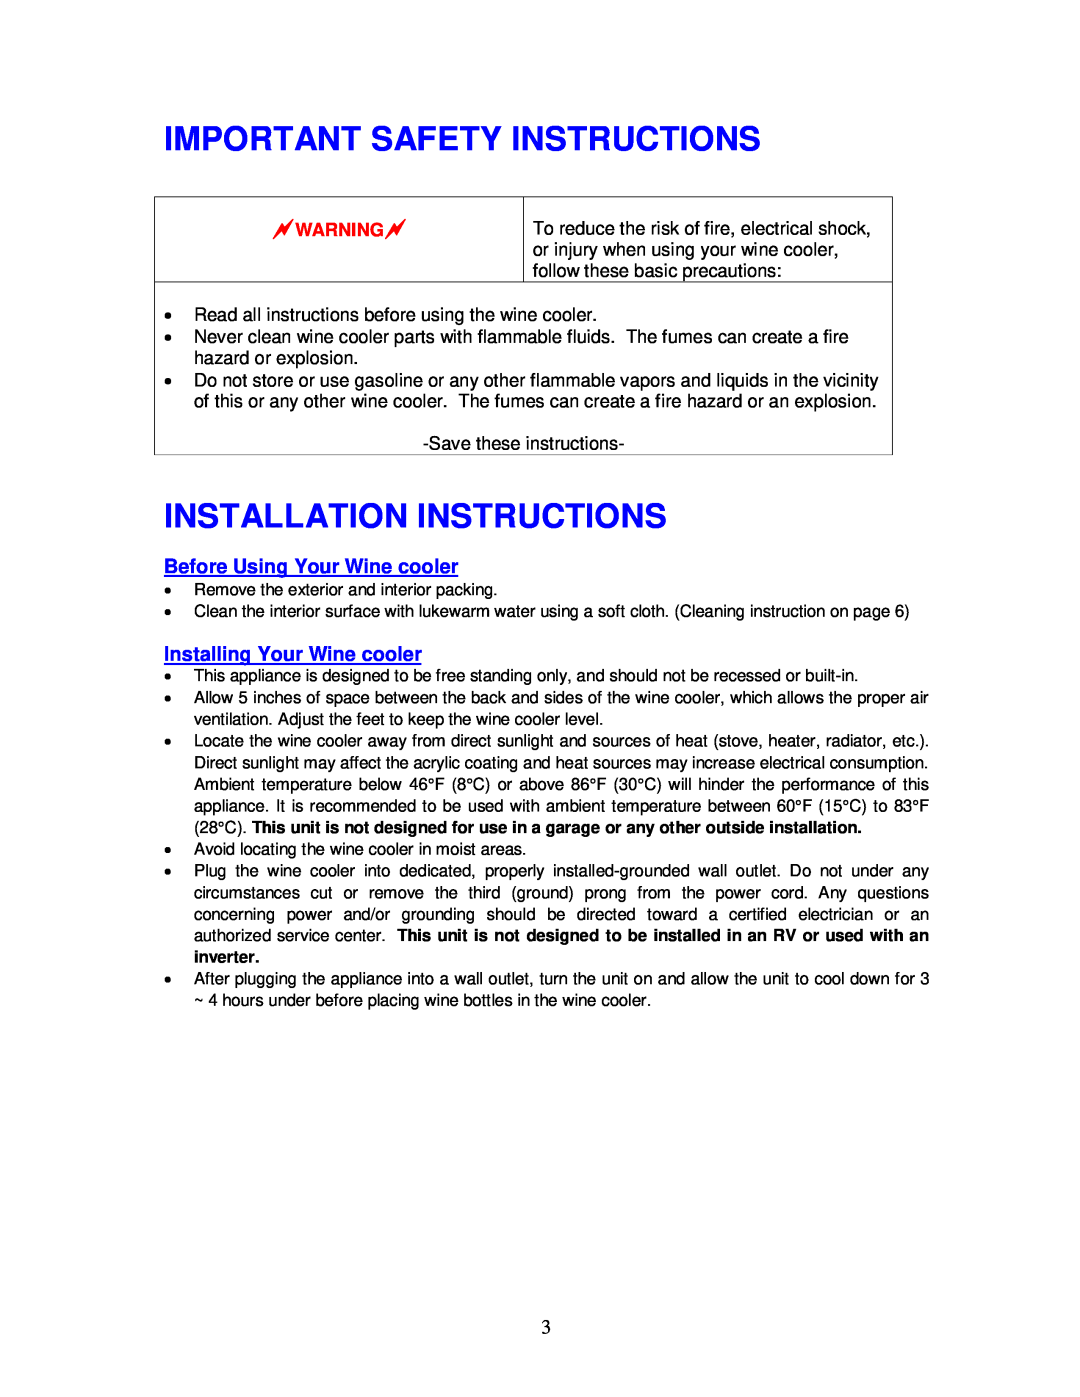 Magic Chef MCWC8DCT3 Important Safety Instructions, Installation Instructions, Before Using Your Wine cooler, Warning 